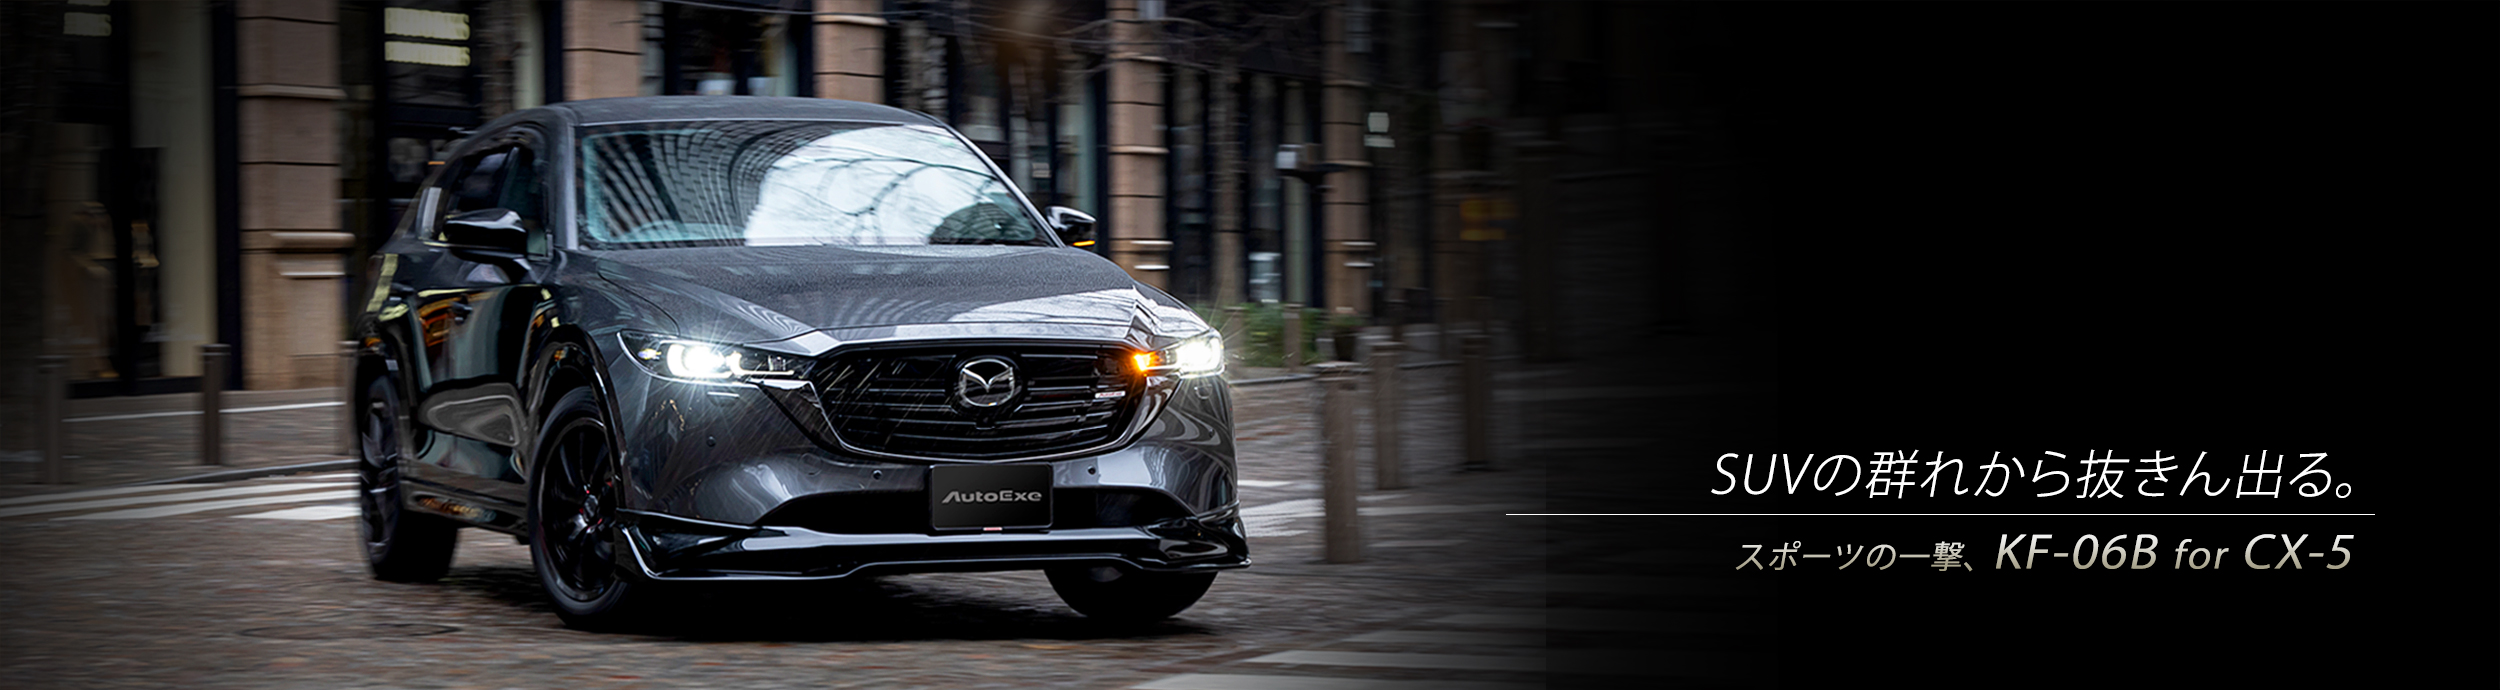 Stand out from the crowd of SUVs. A sports blow, KF-06B for CX-5